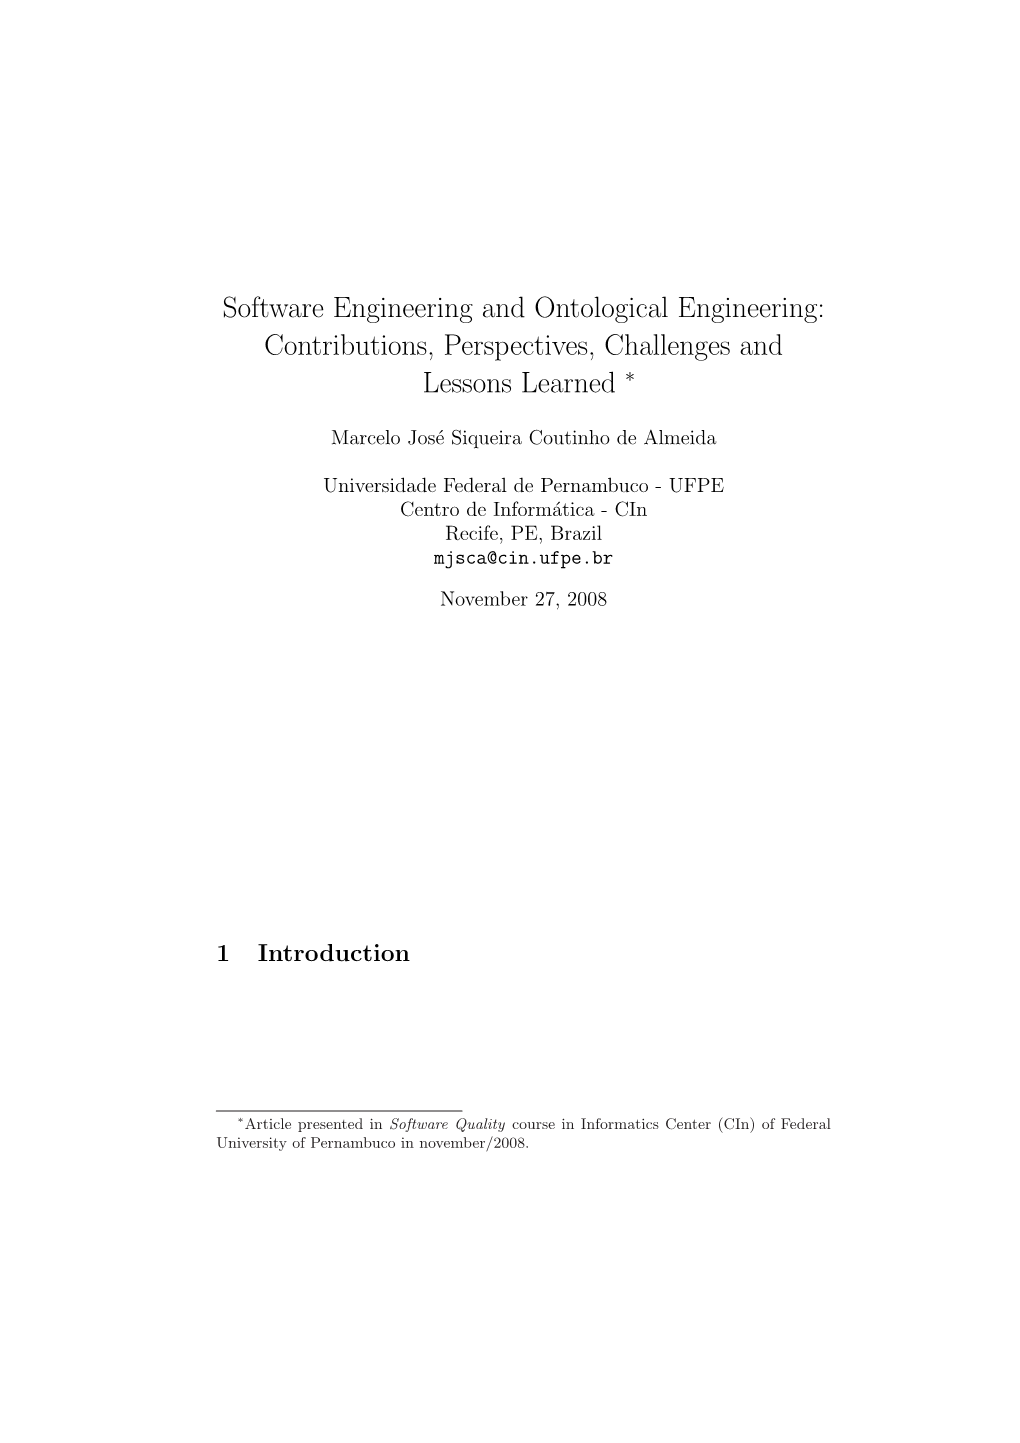 Software Engineering and Ontological Engineering: Contributions, Perspectives, Challenges and Lessons Learned ∗